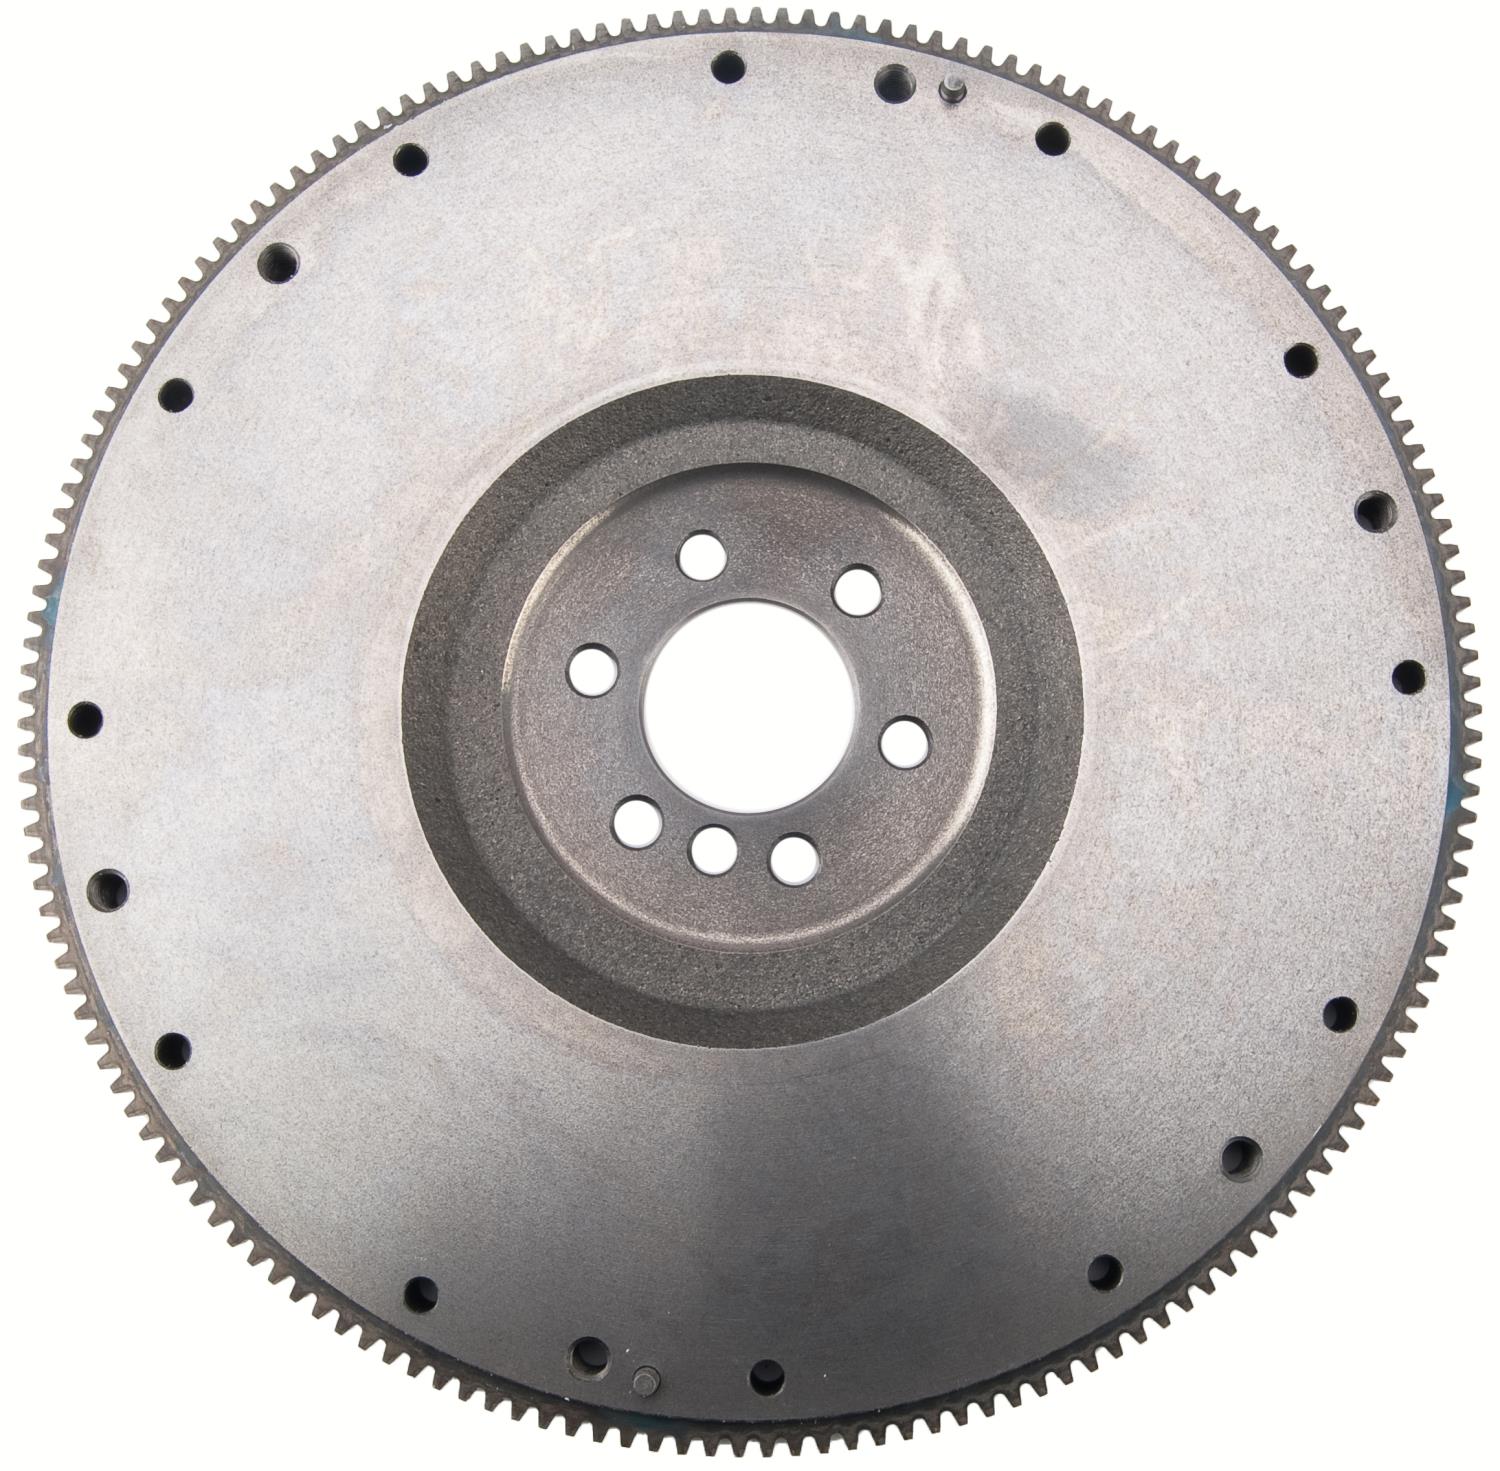 Flywheel for 1997-2004 GM LS1 and LS6 5.7L, 168-Tooth [Internally Balanced]